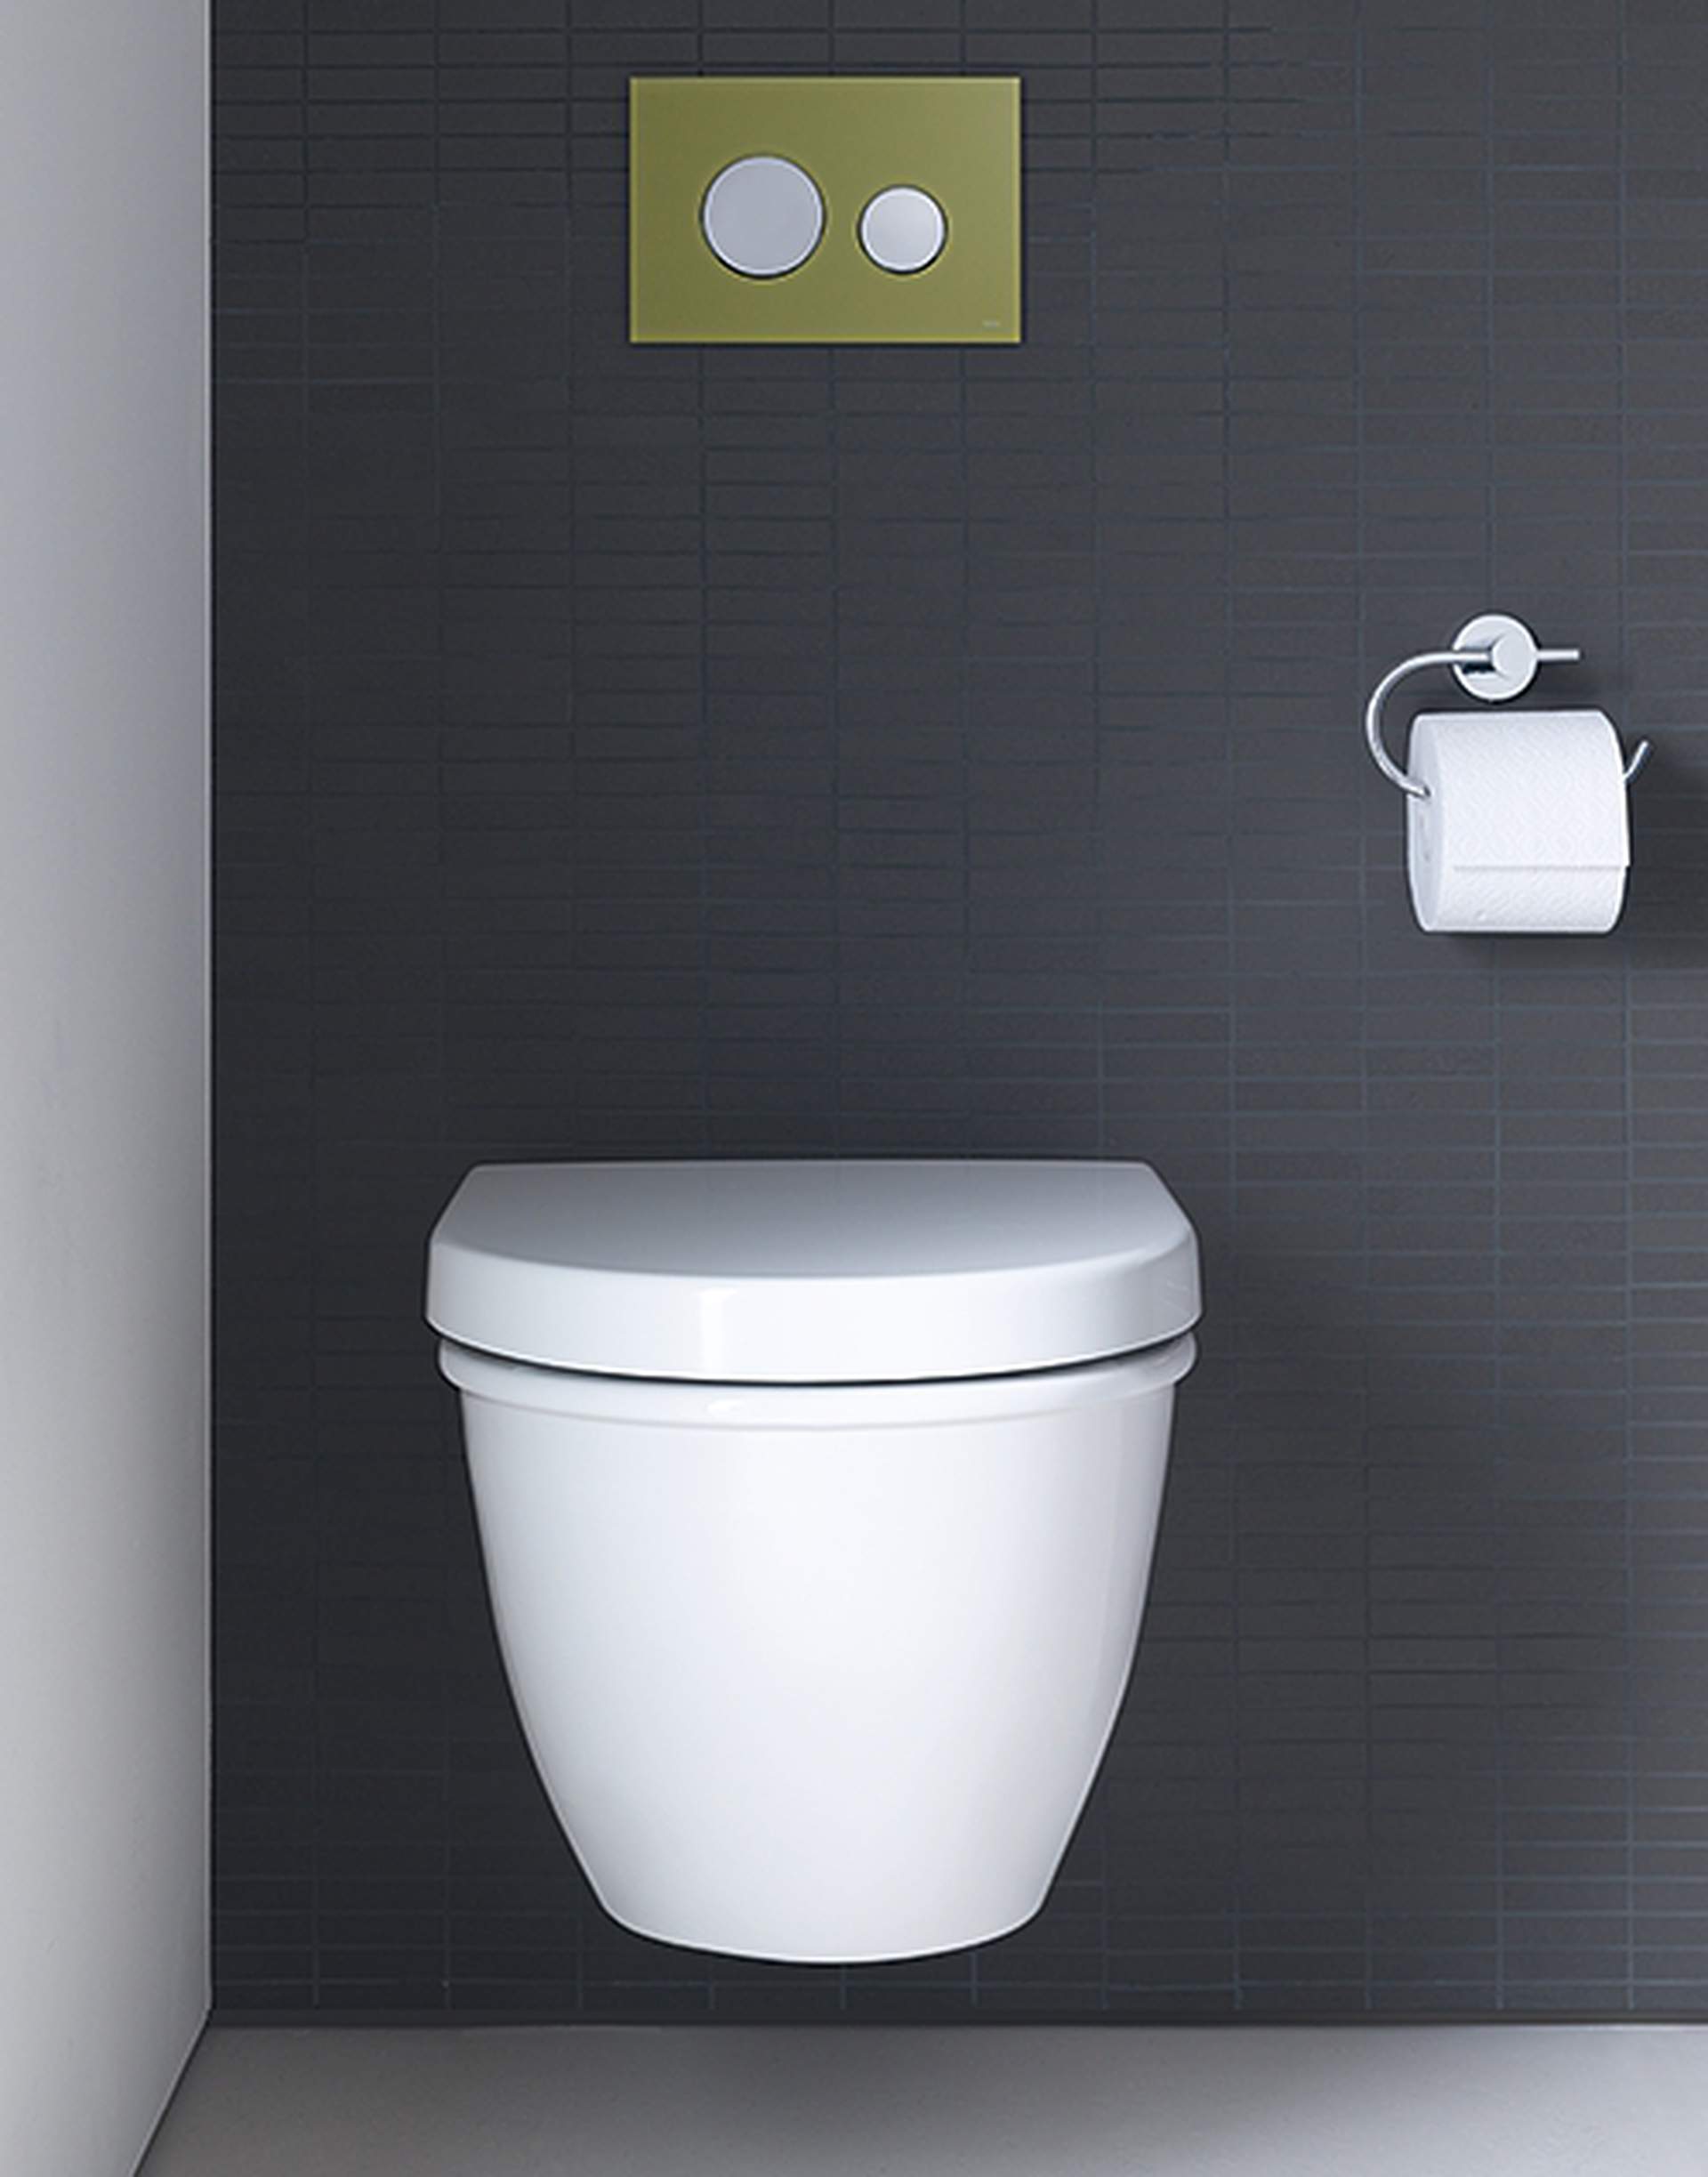 What Do You Should Know When Choosing a Toilet?